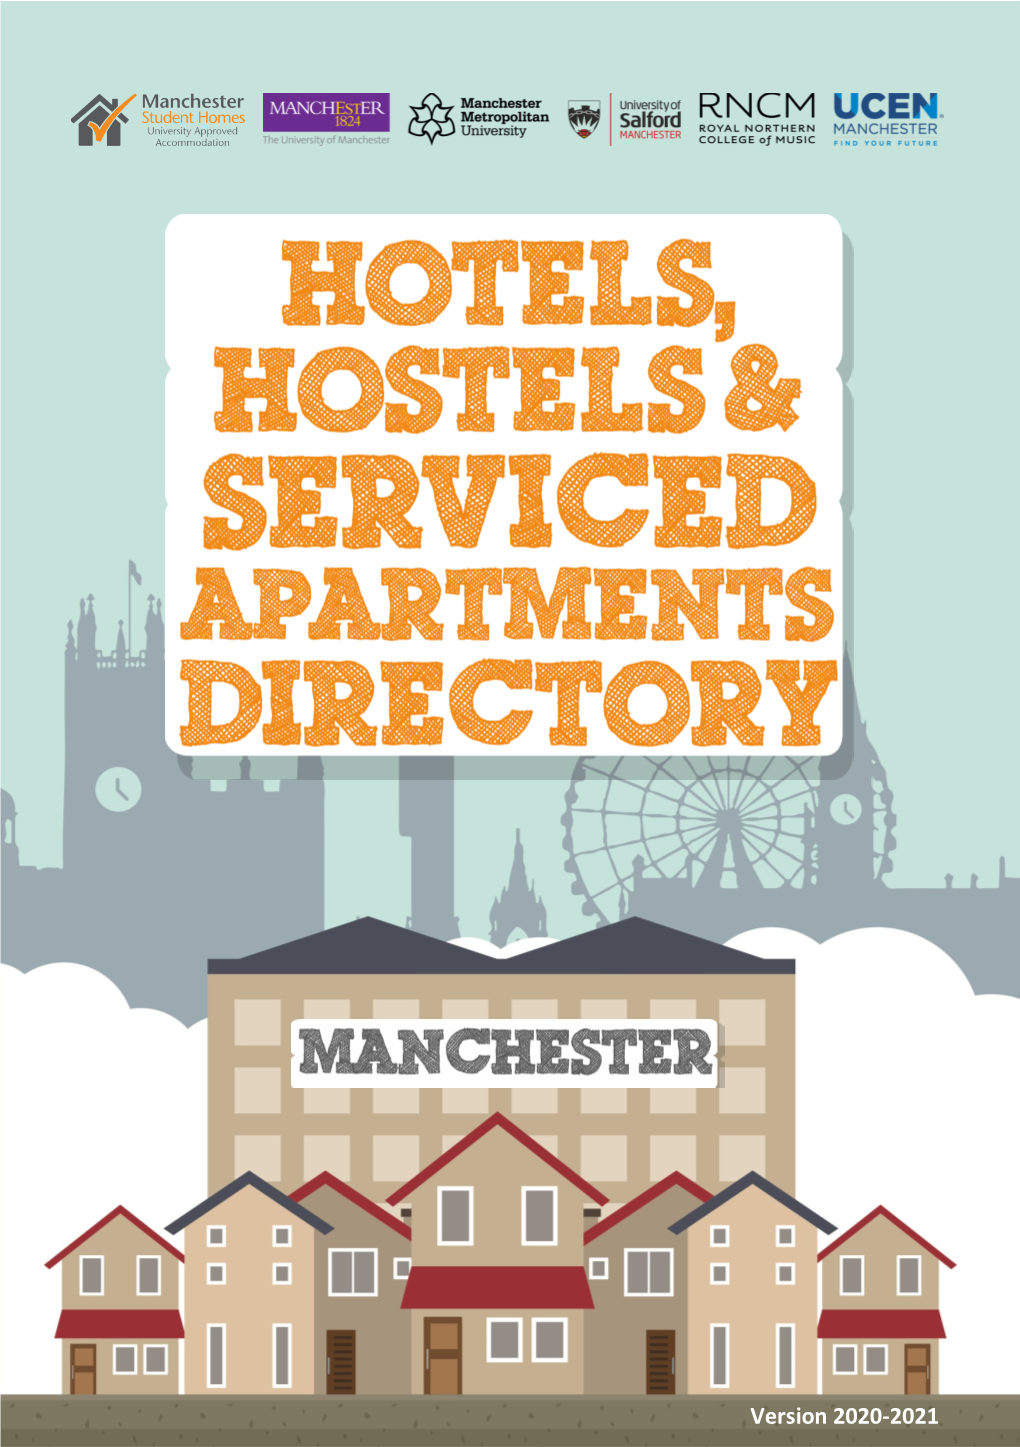 Version 2020-2021 Manchester Student Homes Cannot Recommend Any Particular Hotel, Hostel Or Serviced Apartment